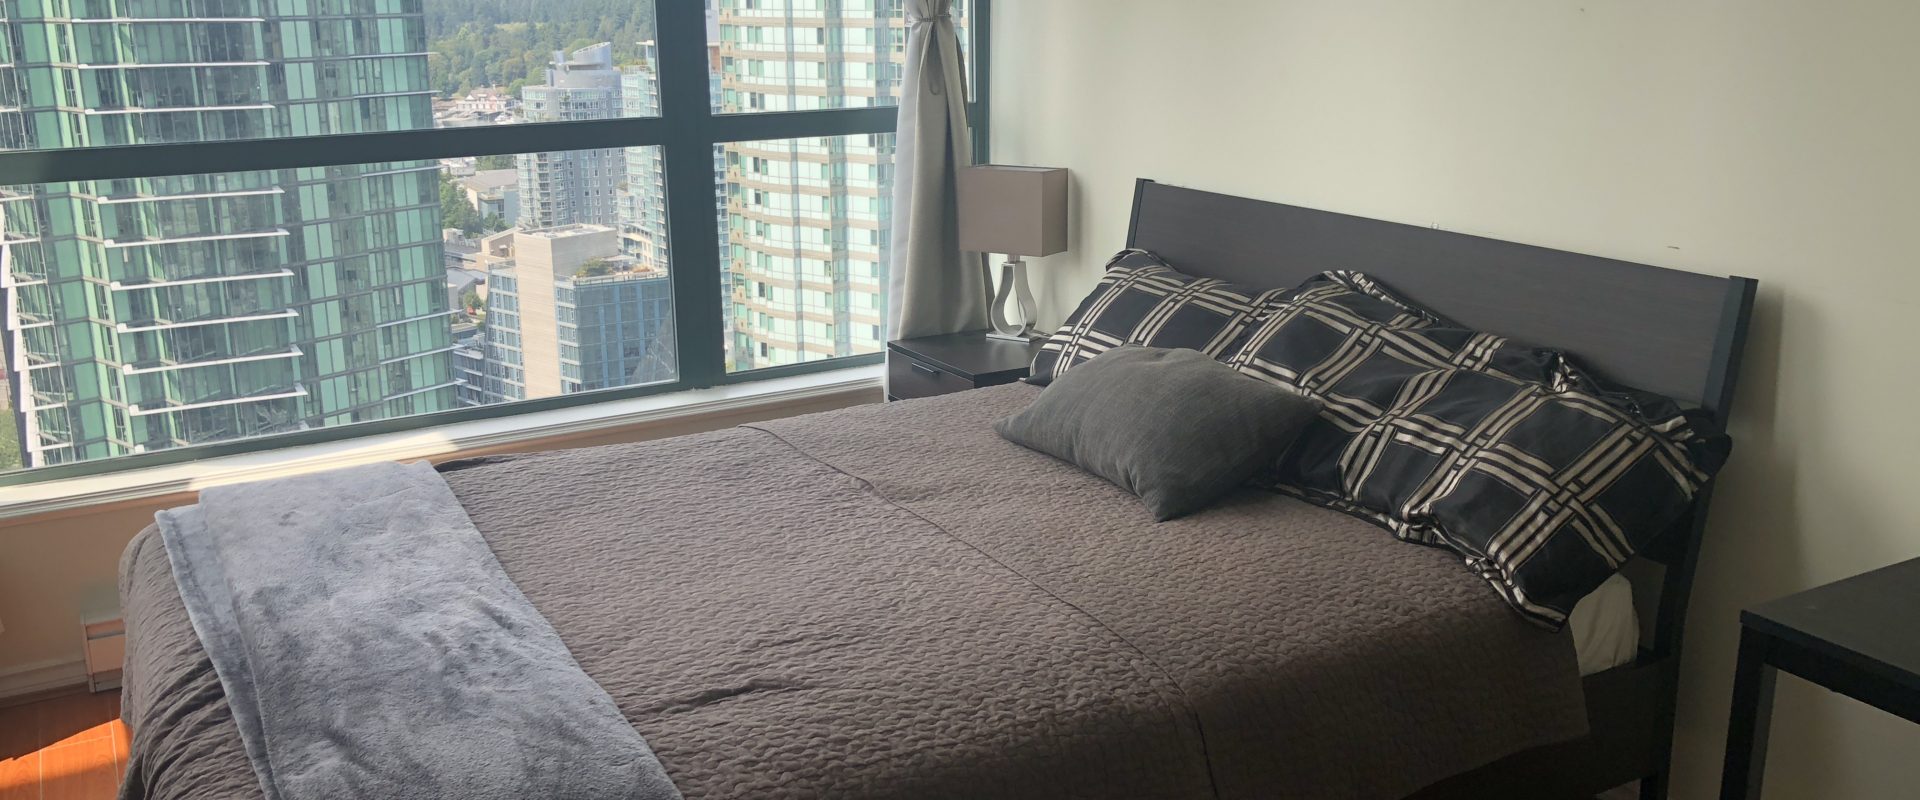 Vancouver Coal Harbour amazing location 2br 2ba condo for rent!